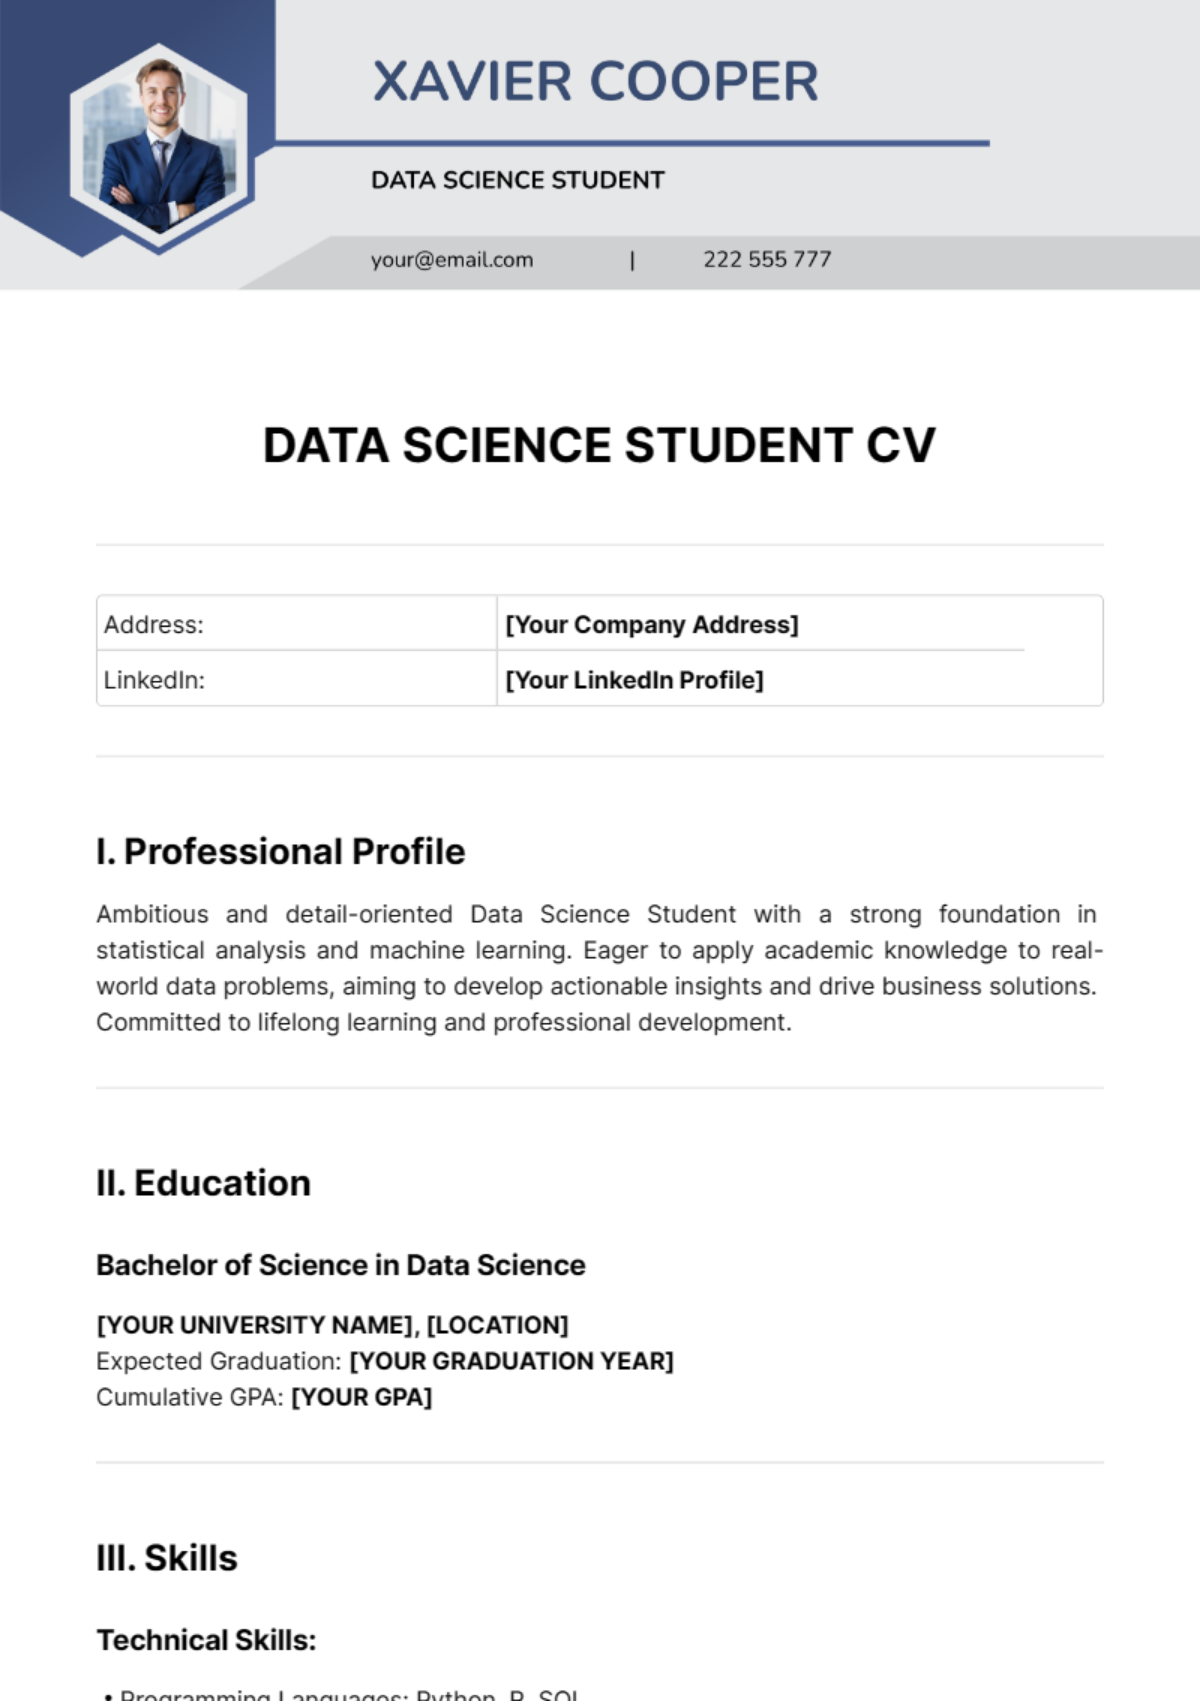 Free Data Science Student CV Template